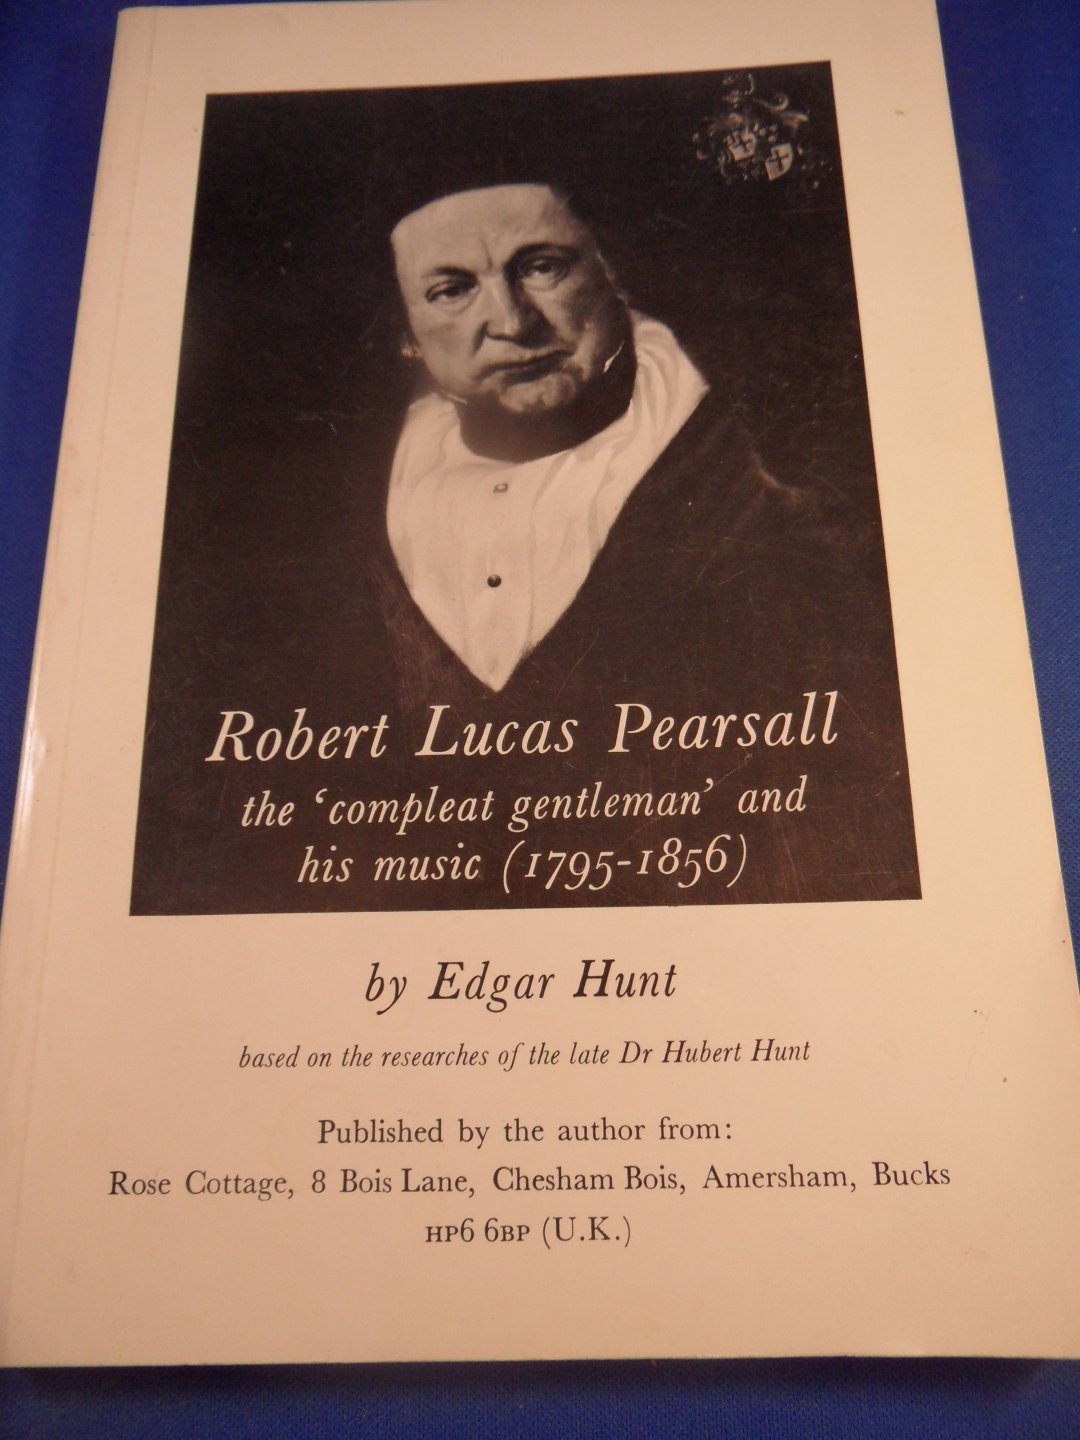 Hunt, Edgar - Robert Lucas Pearsall  The "compleat gentleman" and his music (1795-1856